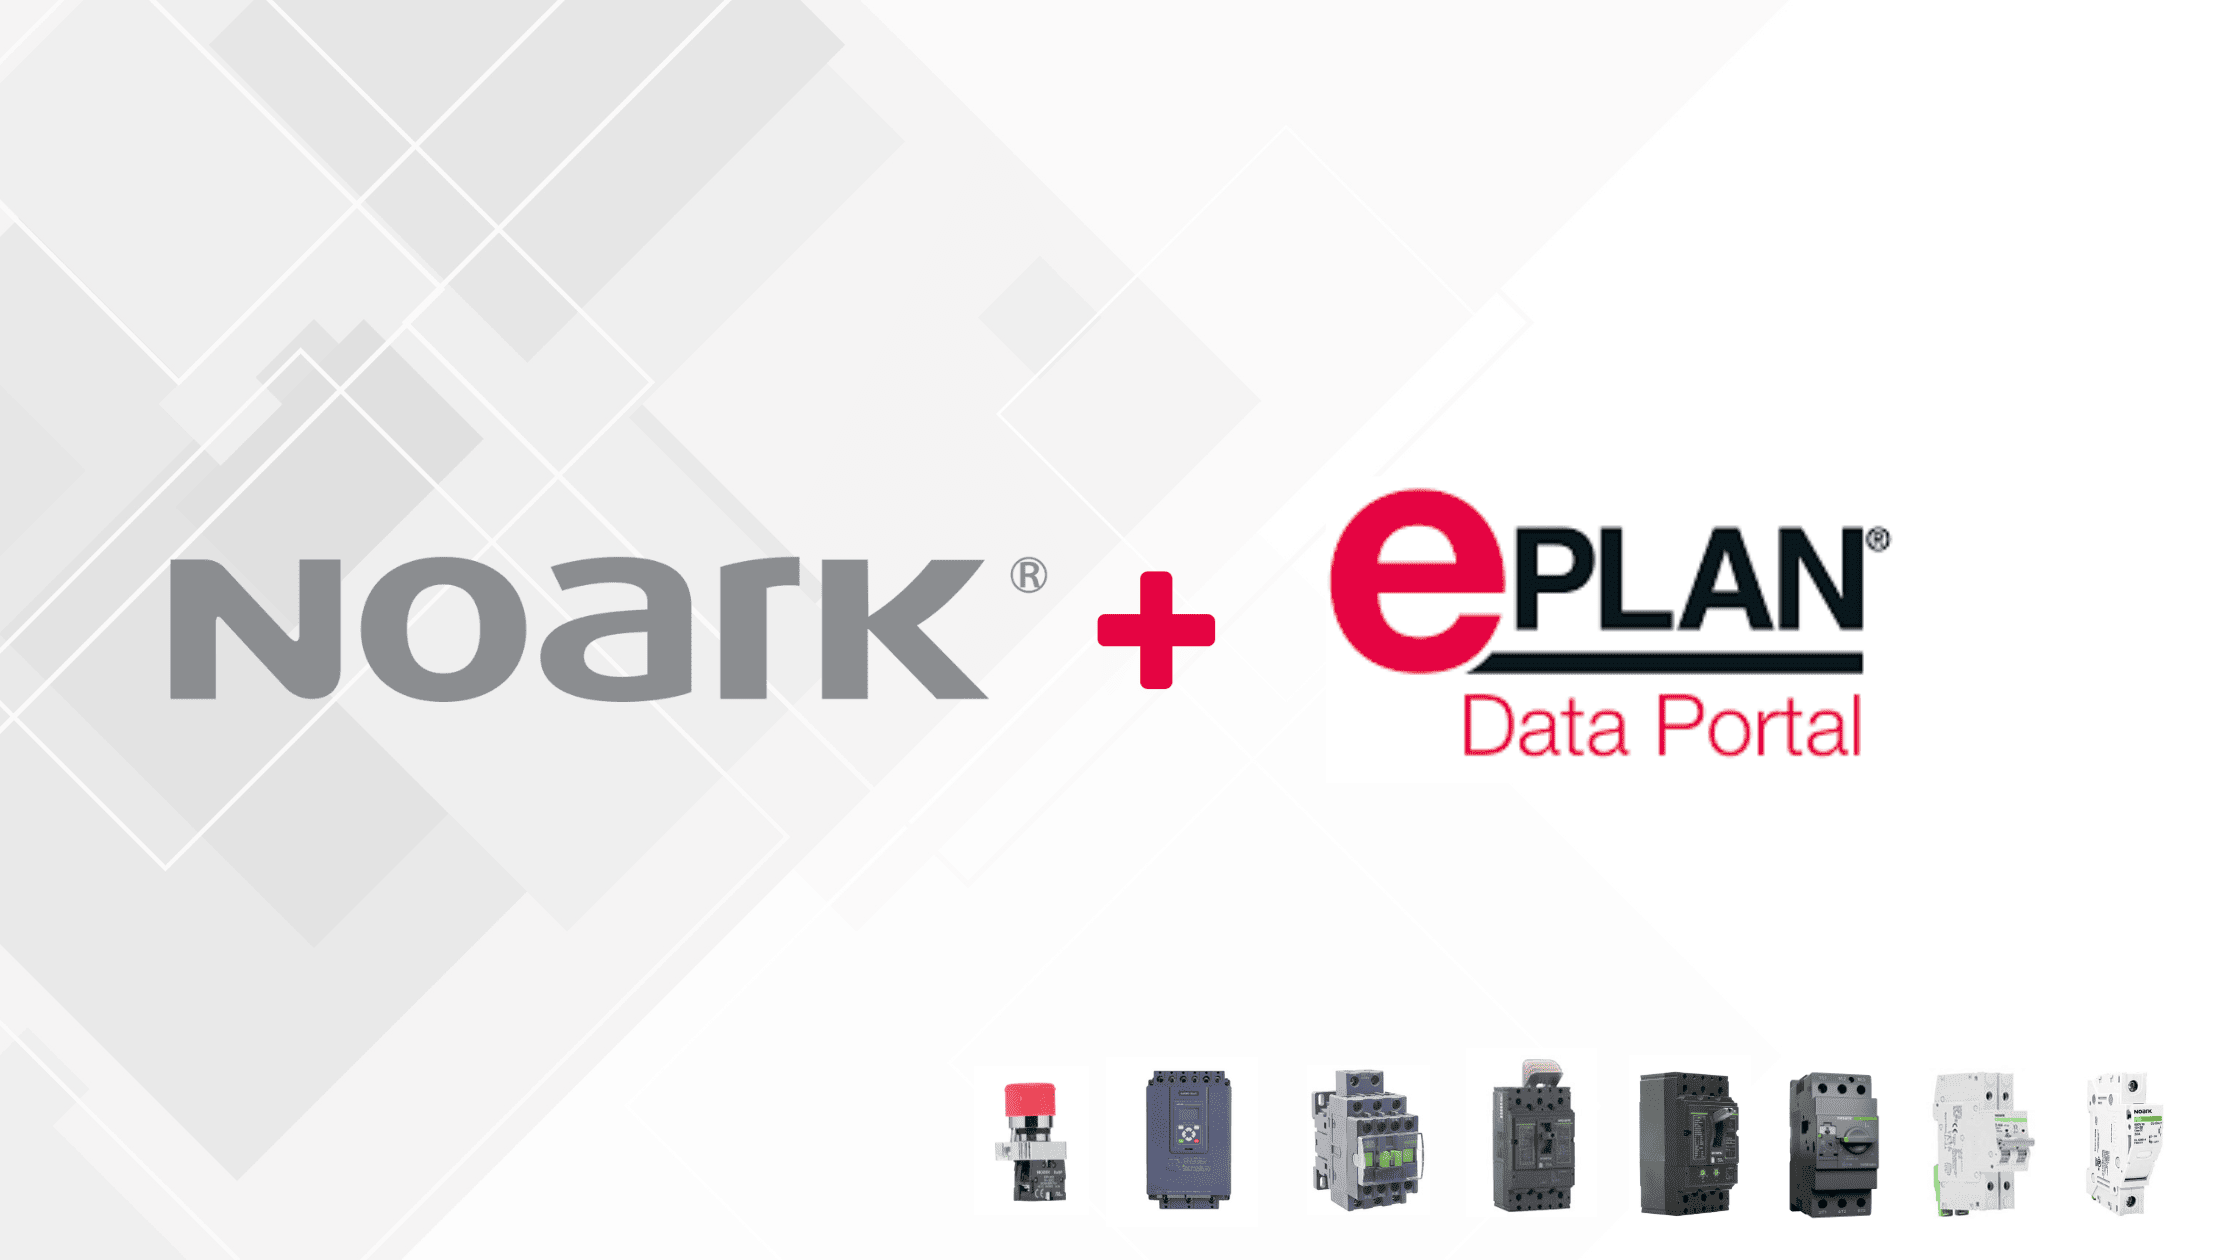 NOARK Electric and EPLAN Partner with 4,500 New Components